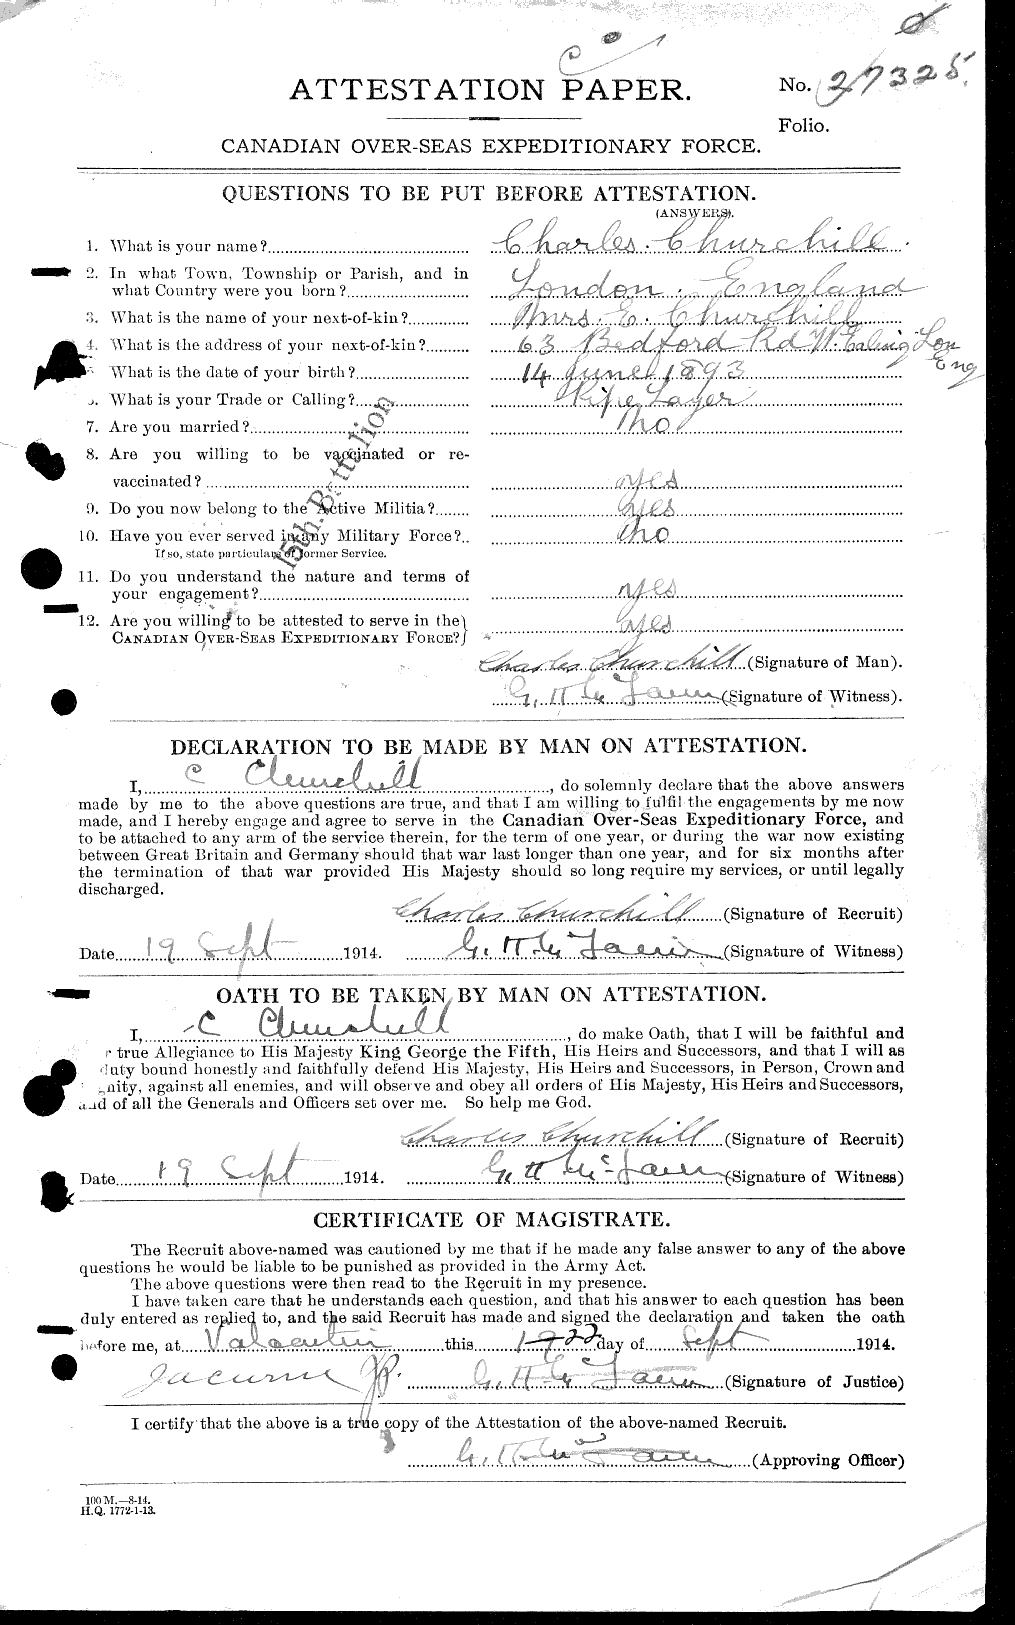 Personnel Records of the First World War - CEF 022429a